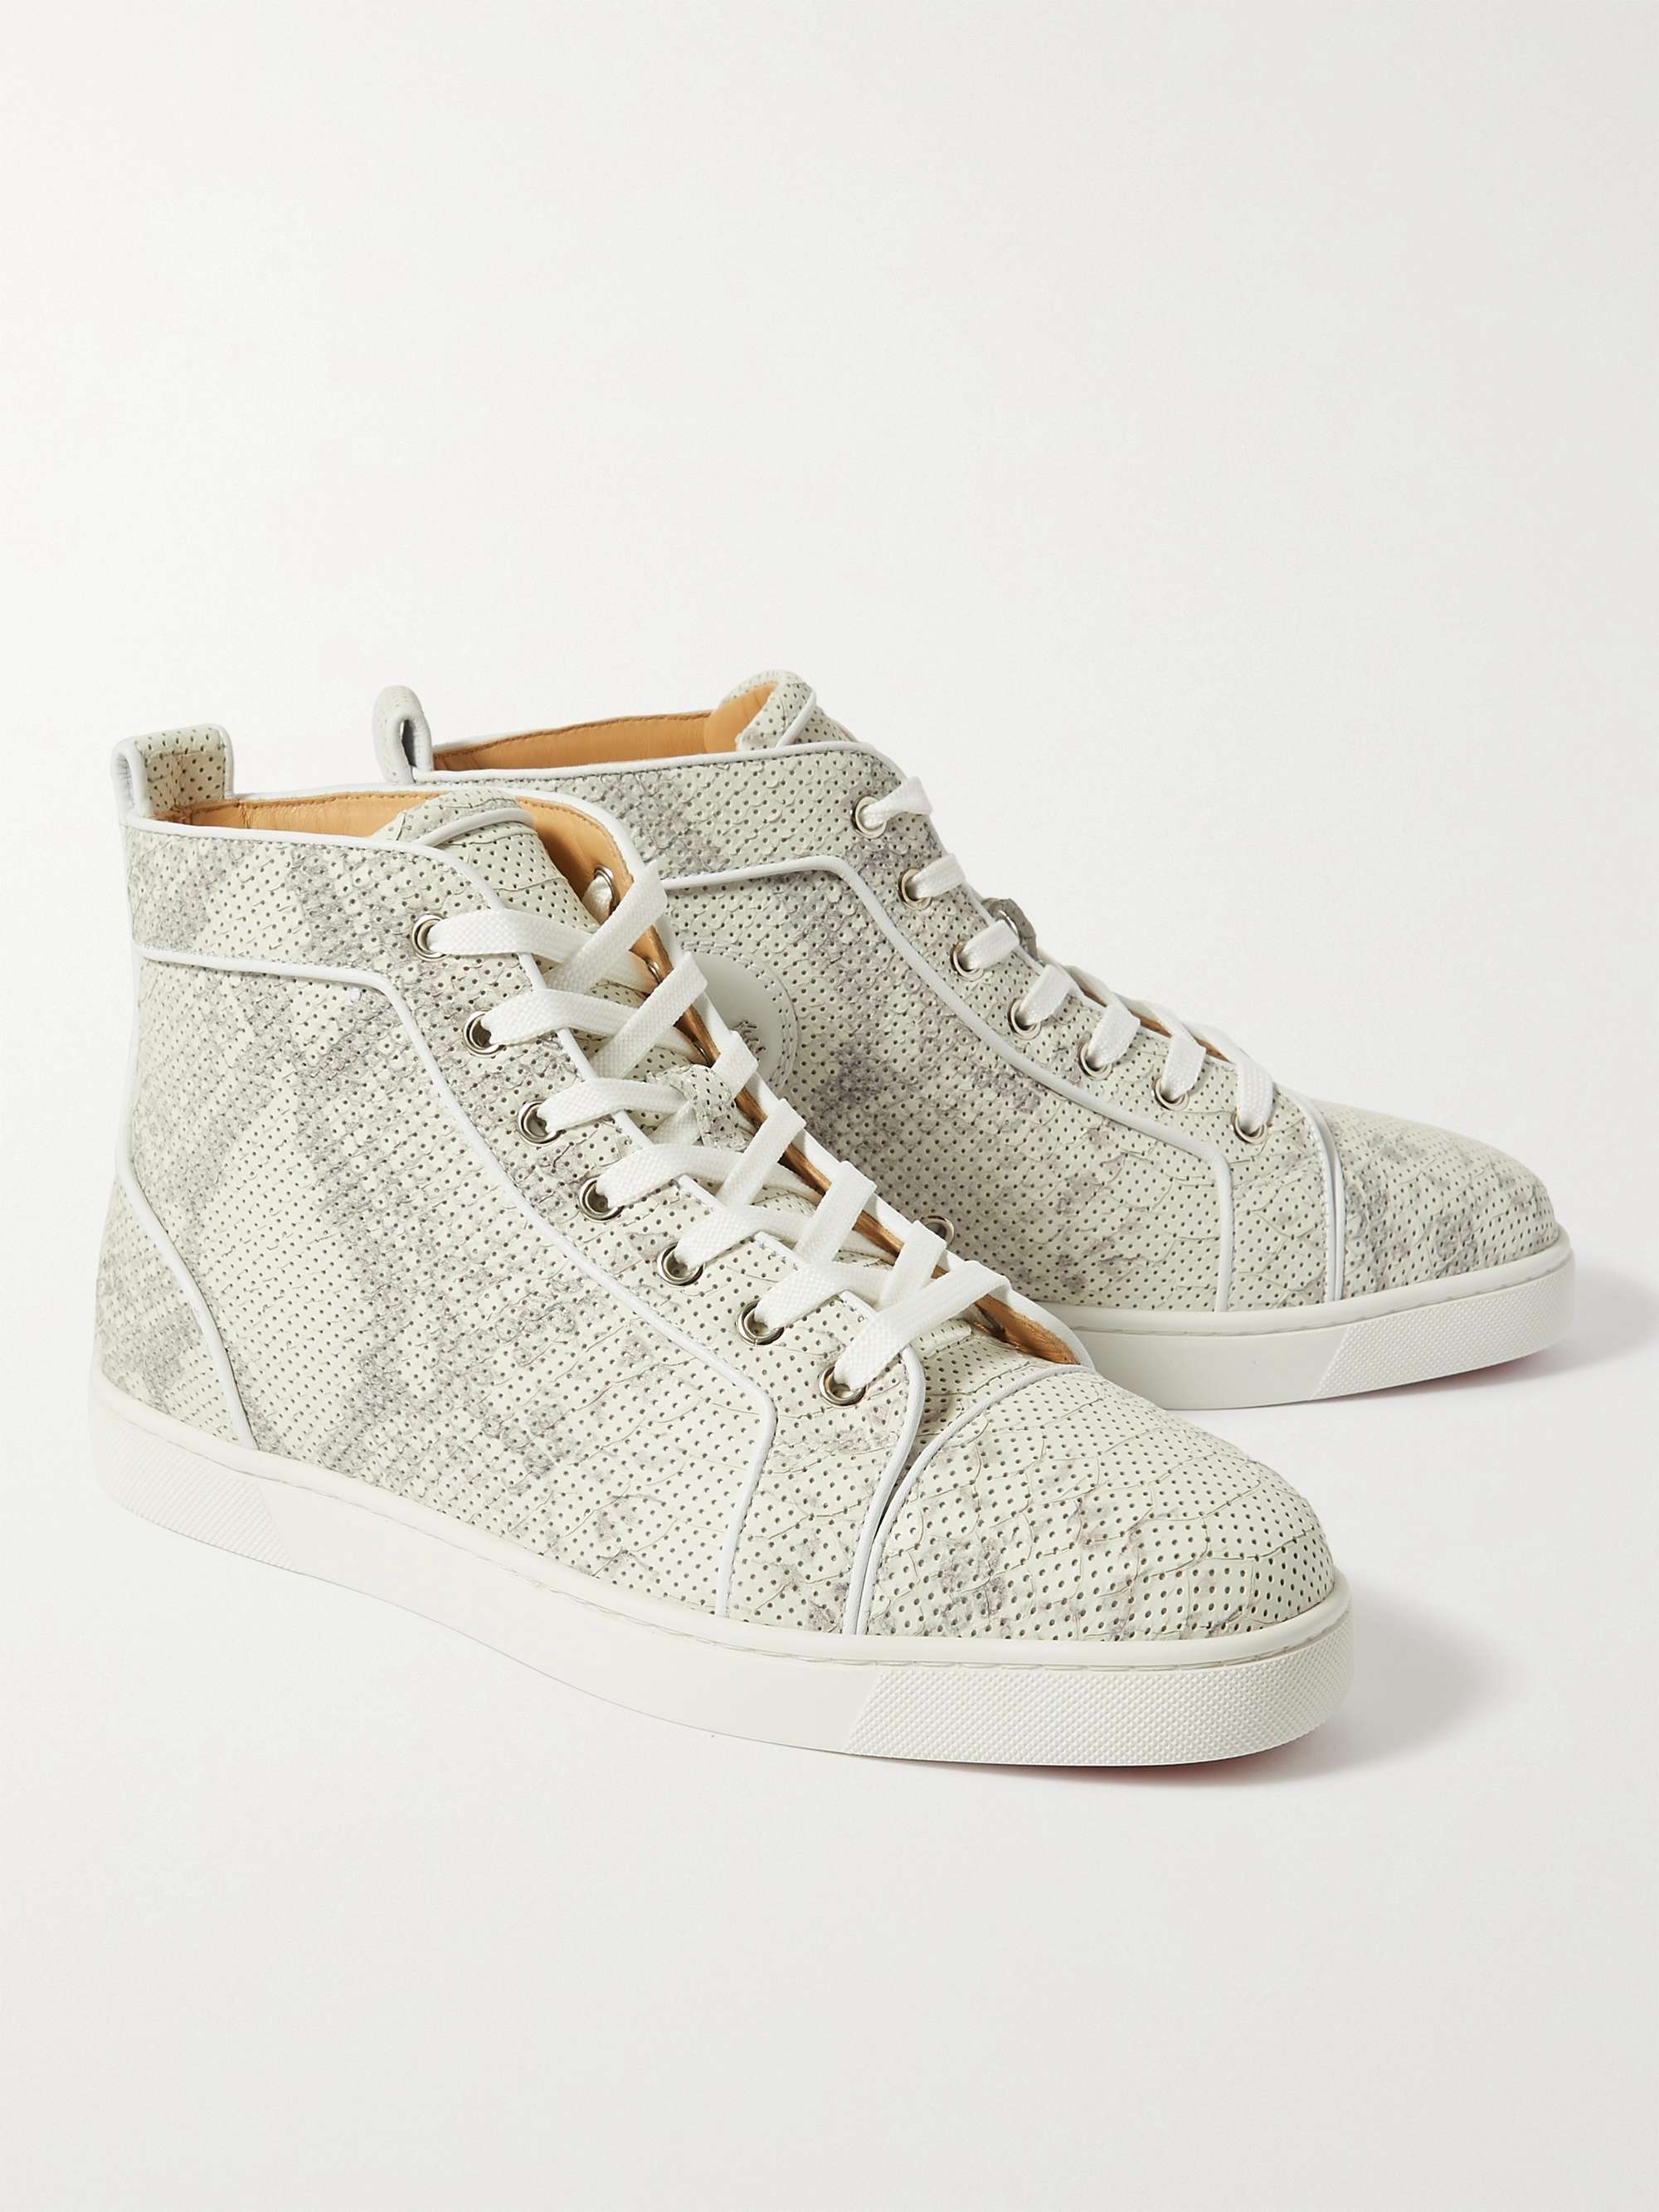 CHRISTIAN LOUBOUTIN Louis Perforated Snake-Effect Leather High-Top Sneakers